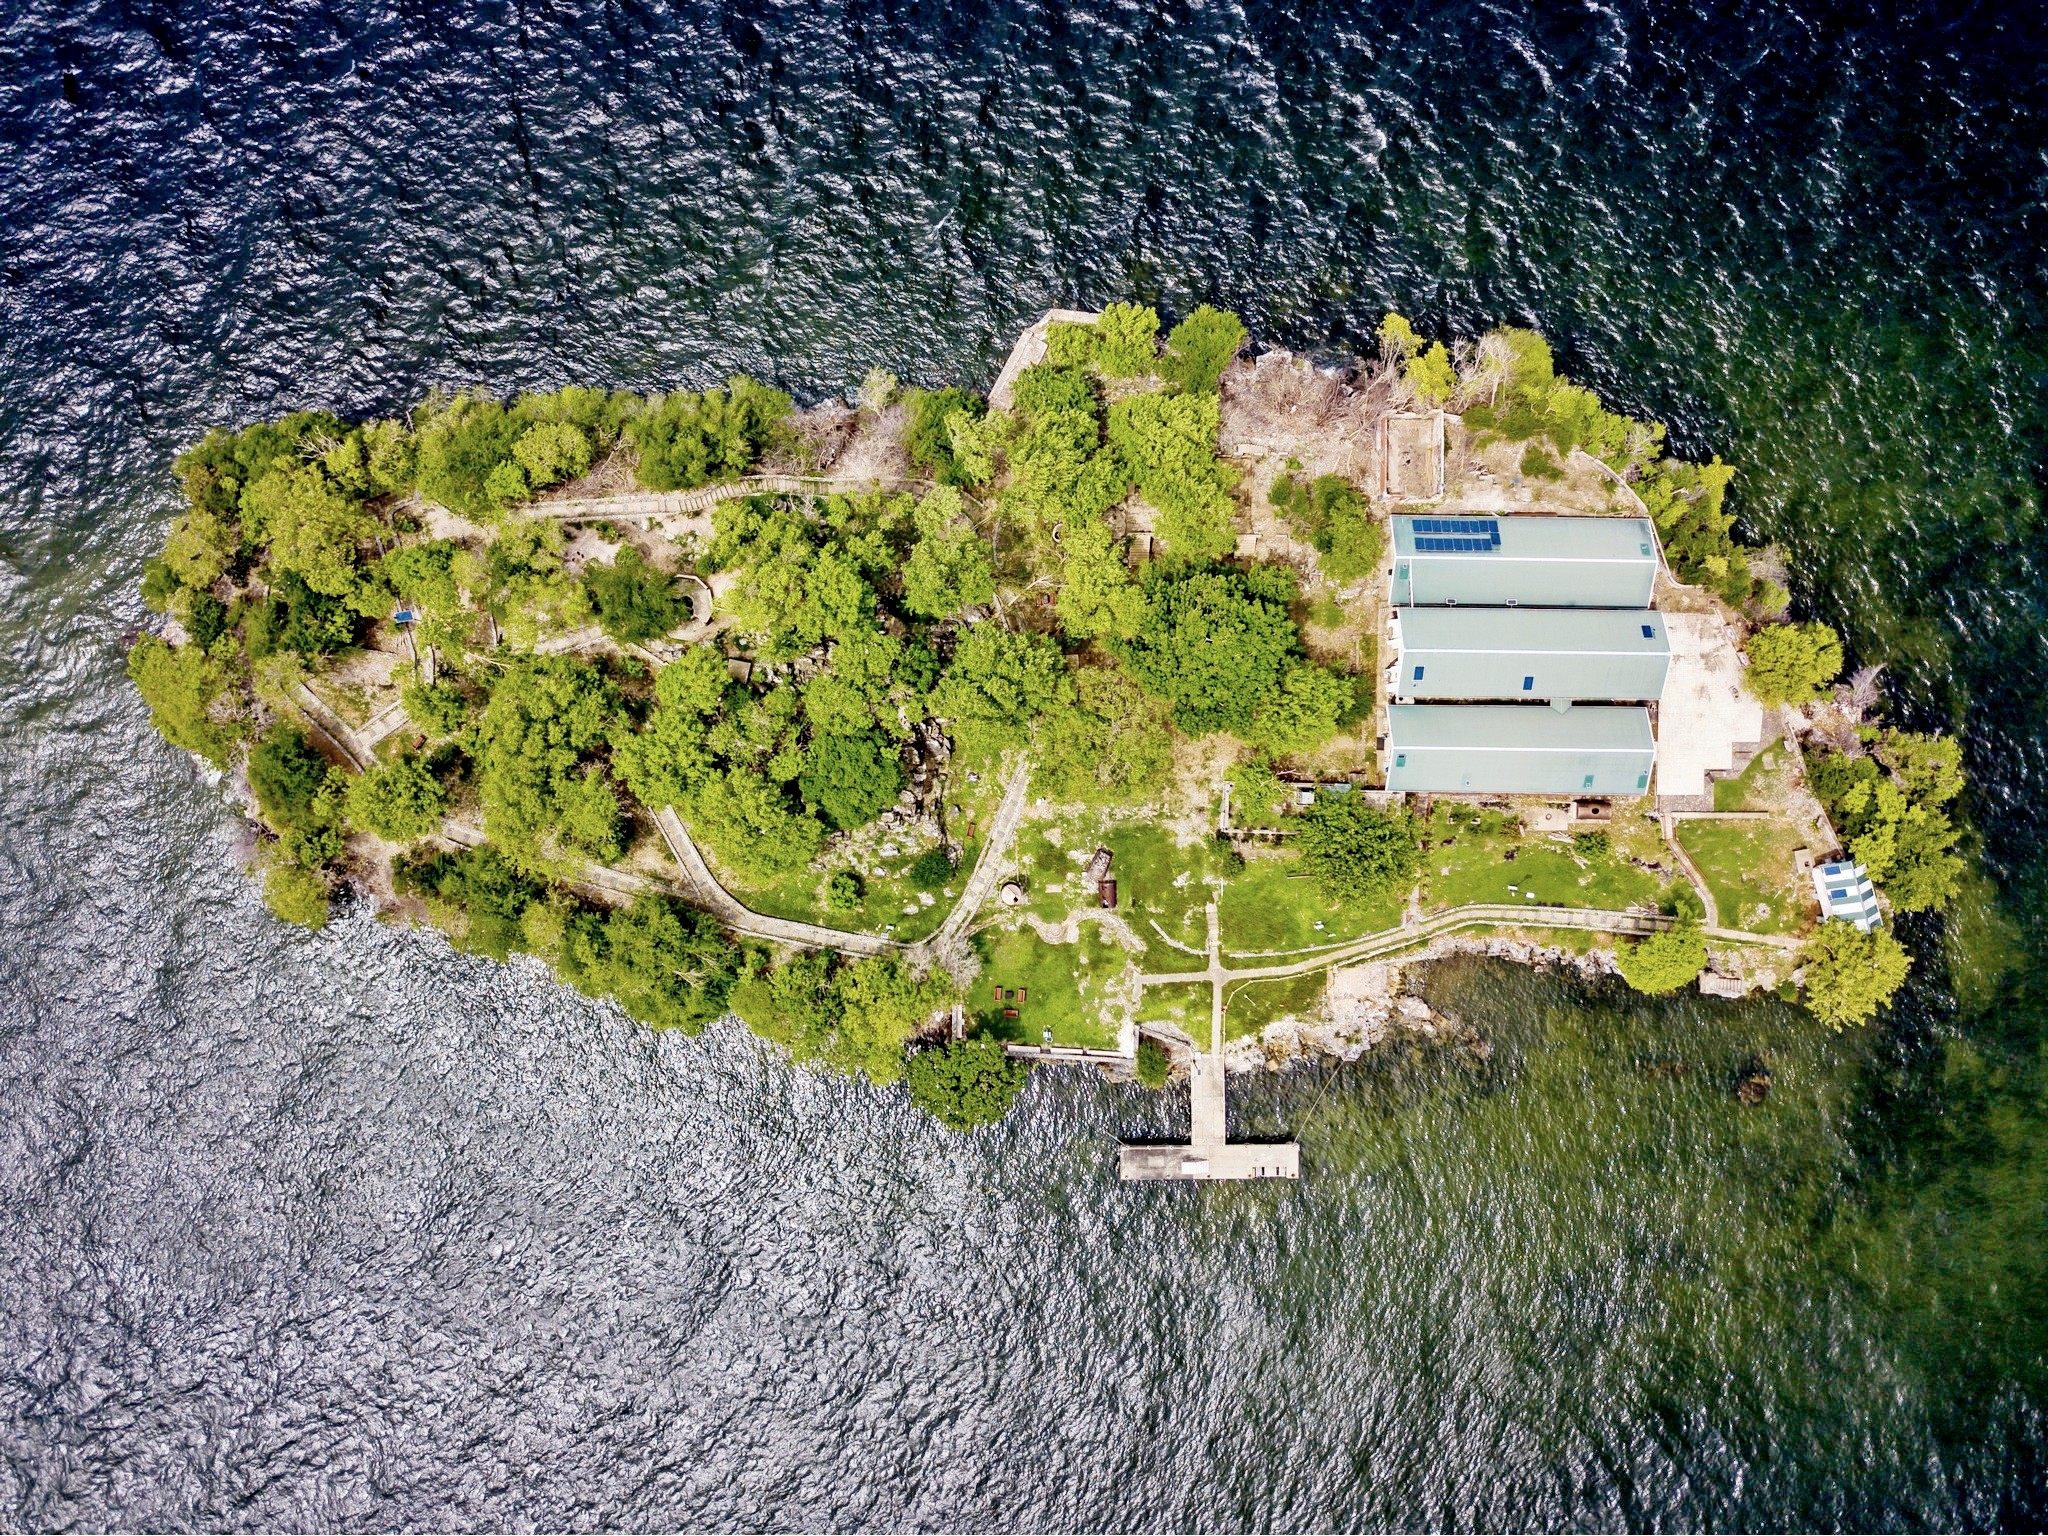 Nelson Island Heritage Site (Option 2) – 3 Hours